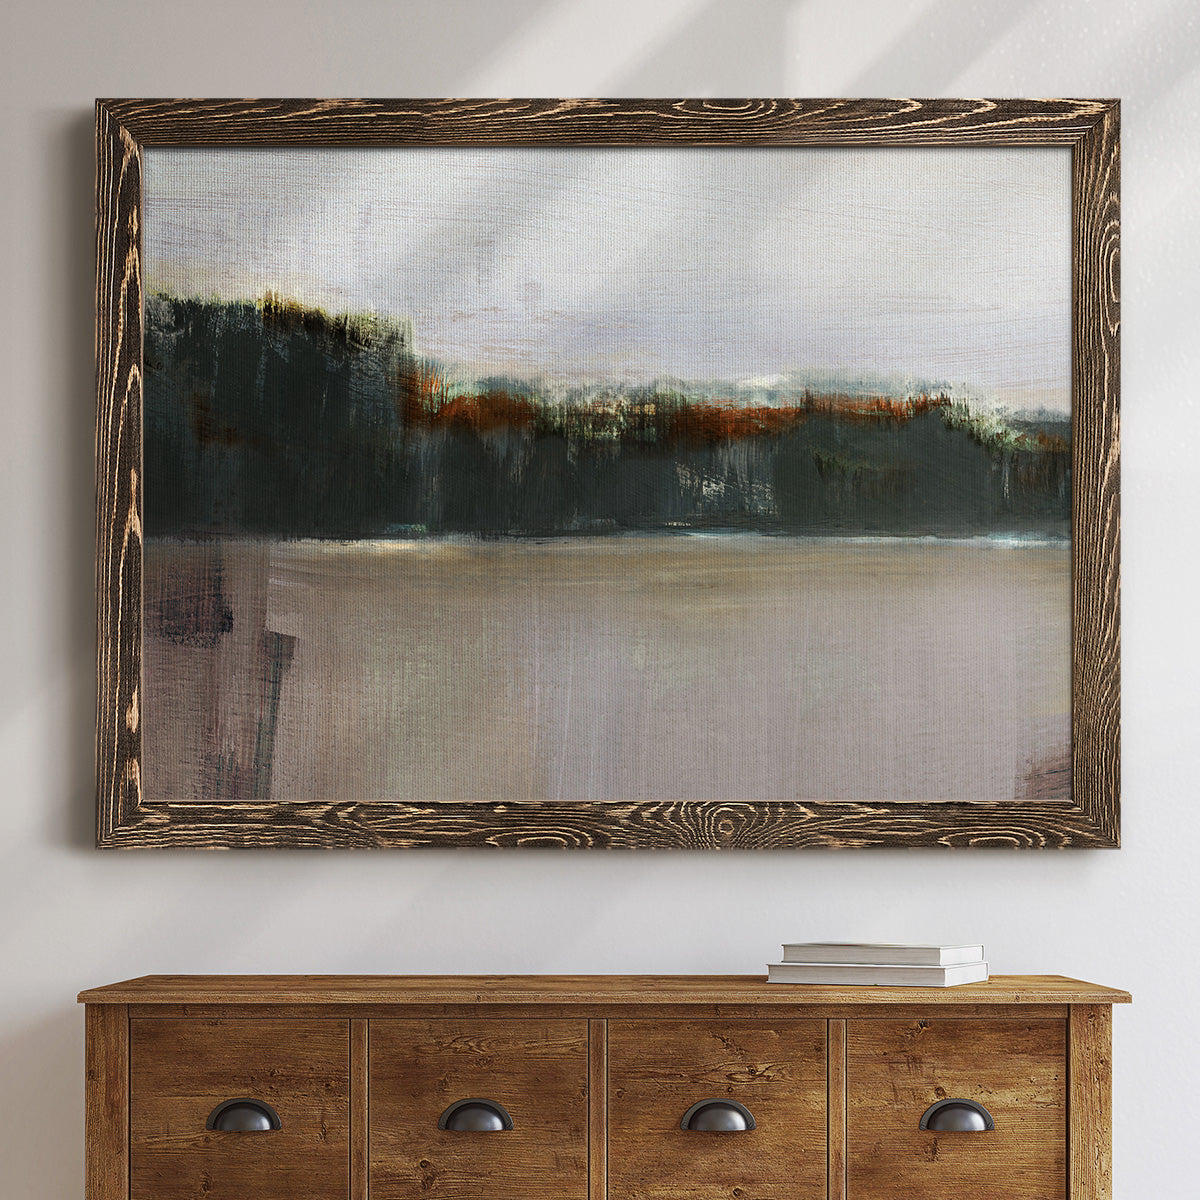 At Dusk Turnwood-Premium Framed Canvas - Ready to Hang